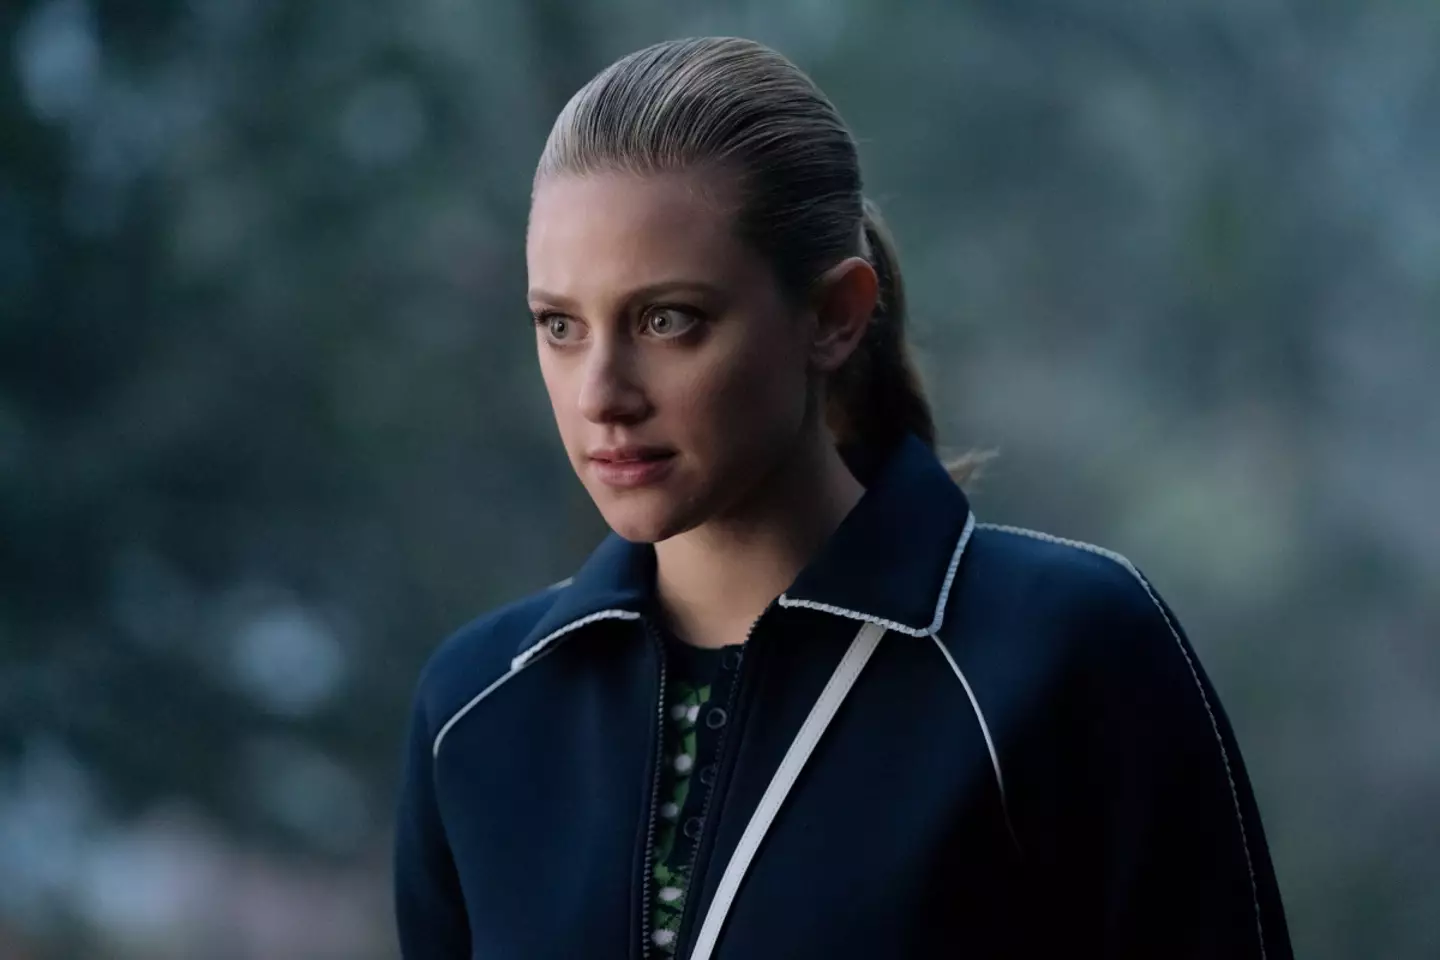 Lili Reinhart has defended Riverdale's weird storylines.